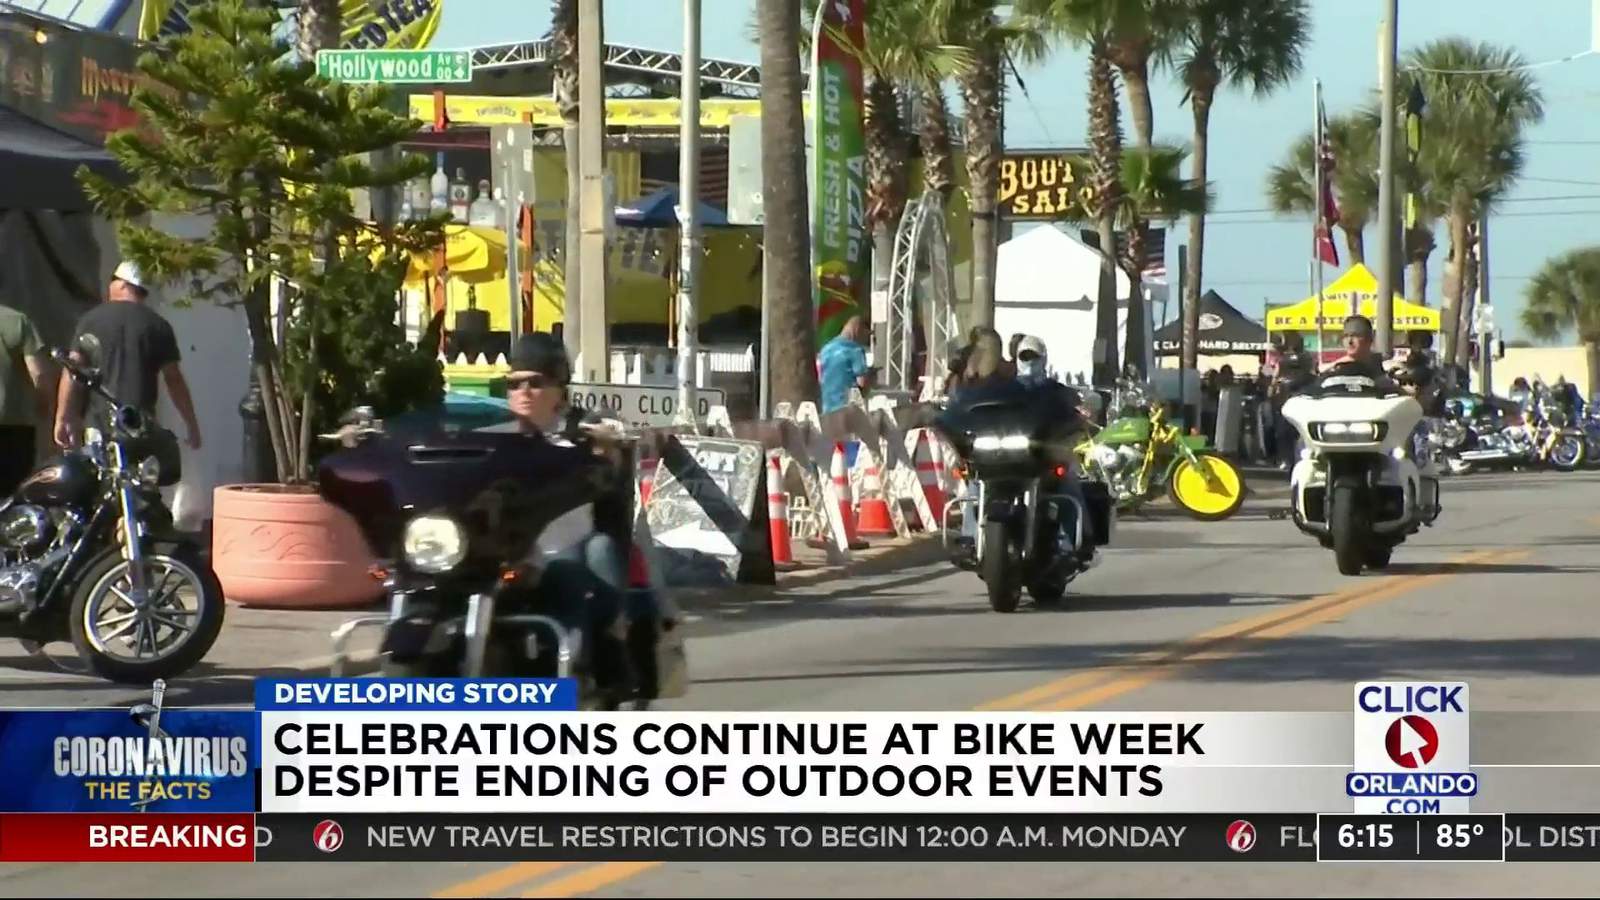 Celebrations continue at Bike Week despite ending of outdoor events.